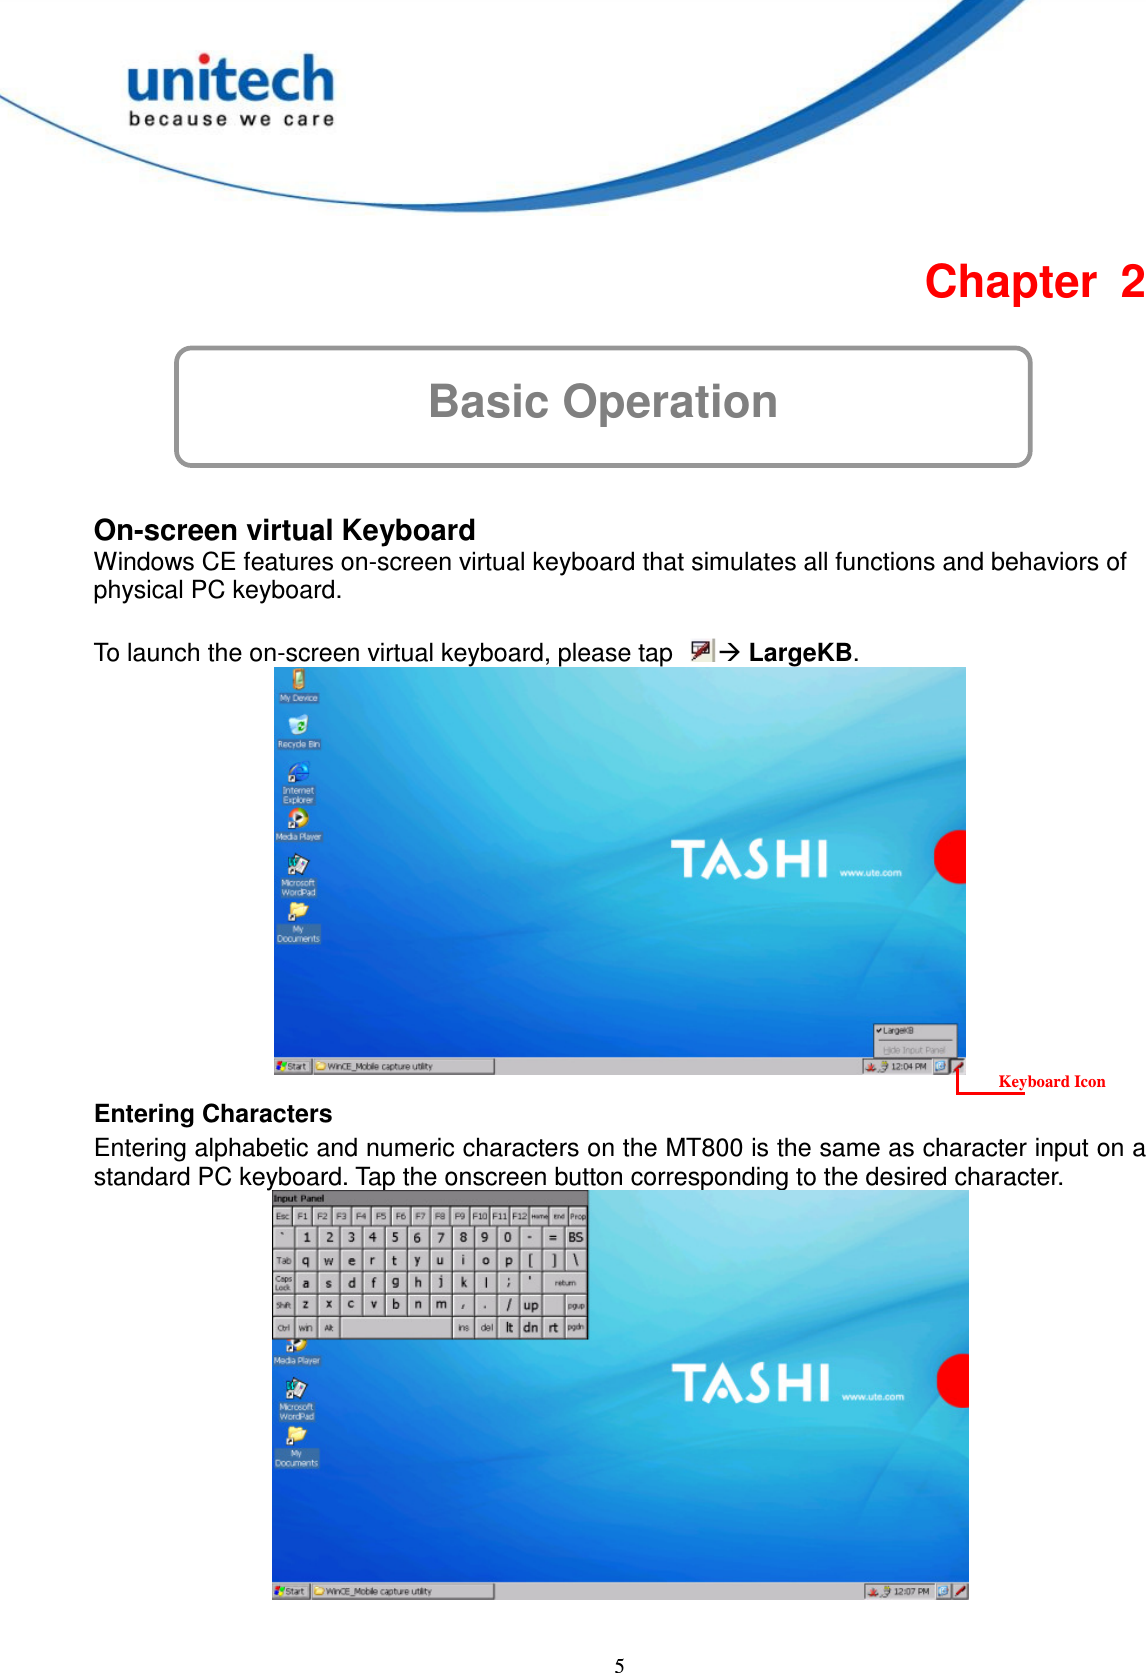  5 Basic Operation Chapter  2      On-screen virtual Keyboard Windows CE features on-screen virtual keyboard that simulates all functions and behaviors of physical PC keyboard.  To launch the on-screen virtual keyboard, please tap   LargeKB.      Entering Characters Entering alphabetic and numeric characters on the MT800 is the same as character input on a standard PC keyboard. Tap the onscreen button corresponding to the desired character.   Keyboard Icon 